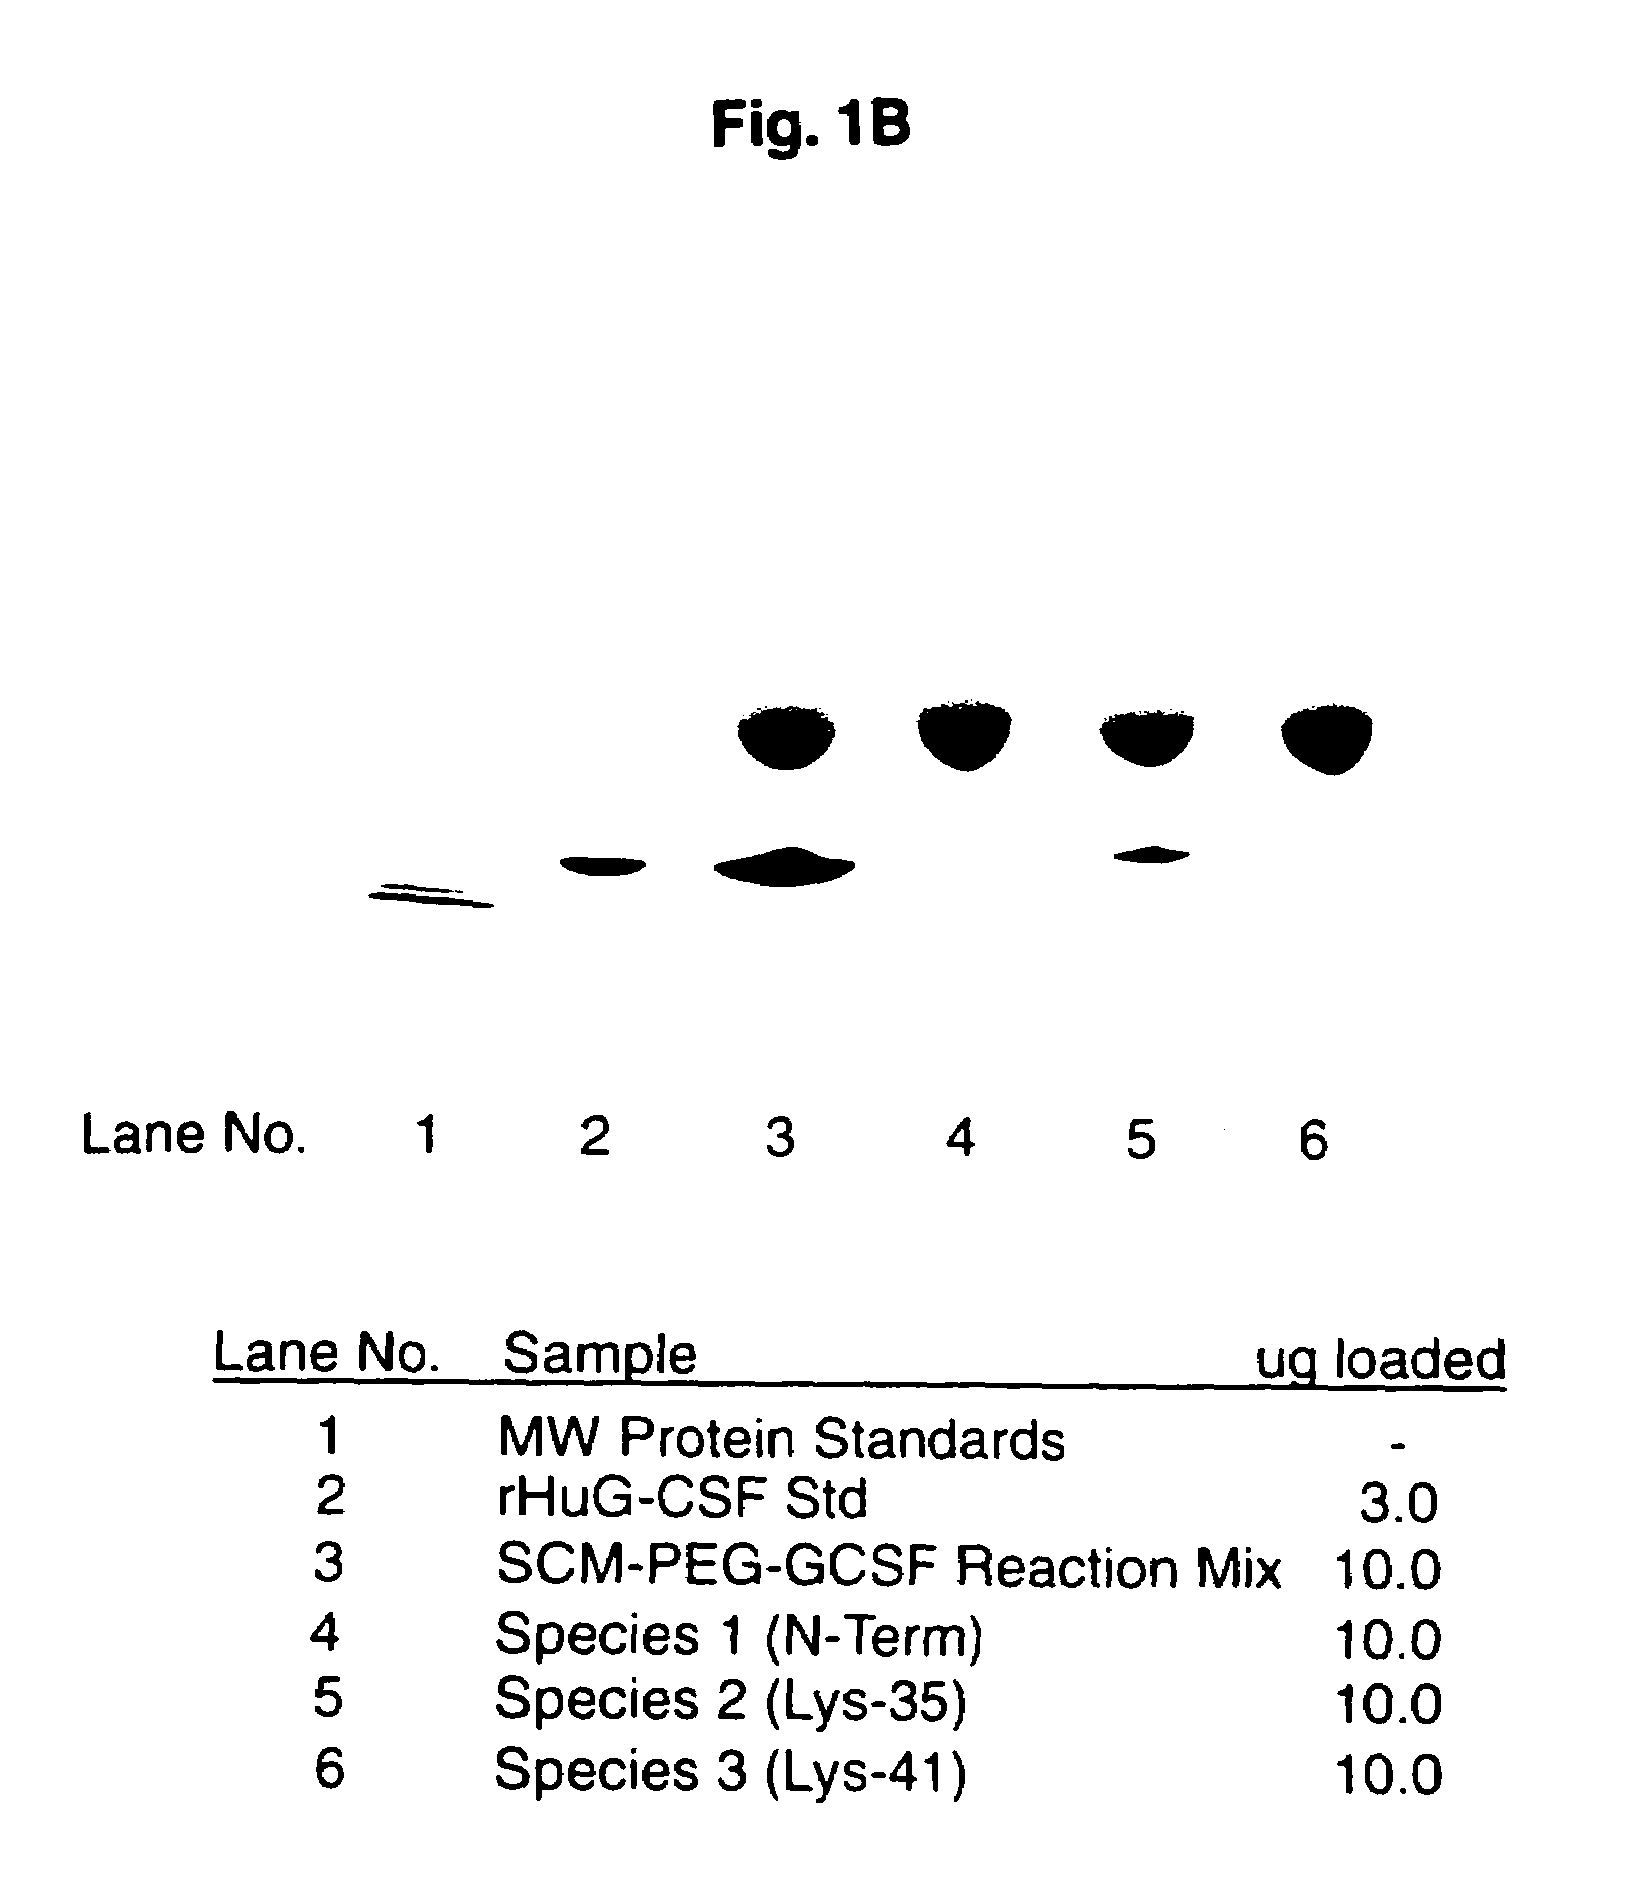 N-terminally chemically modified protein compositions and methods